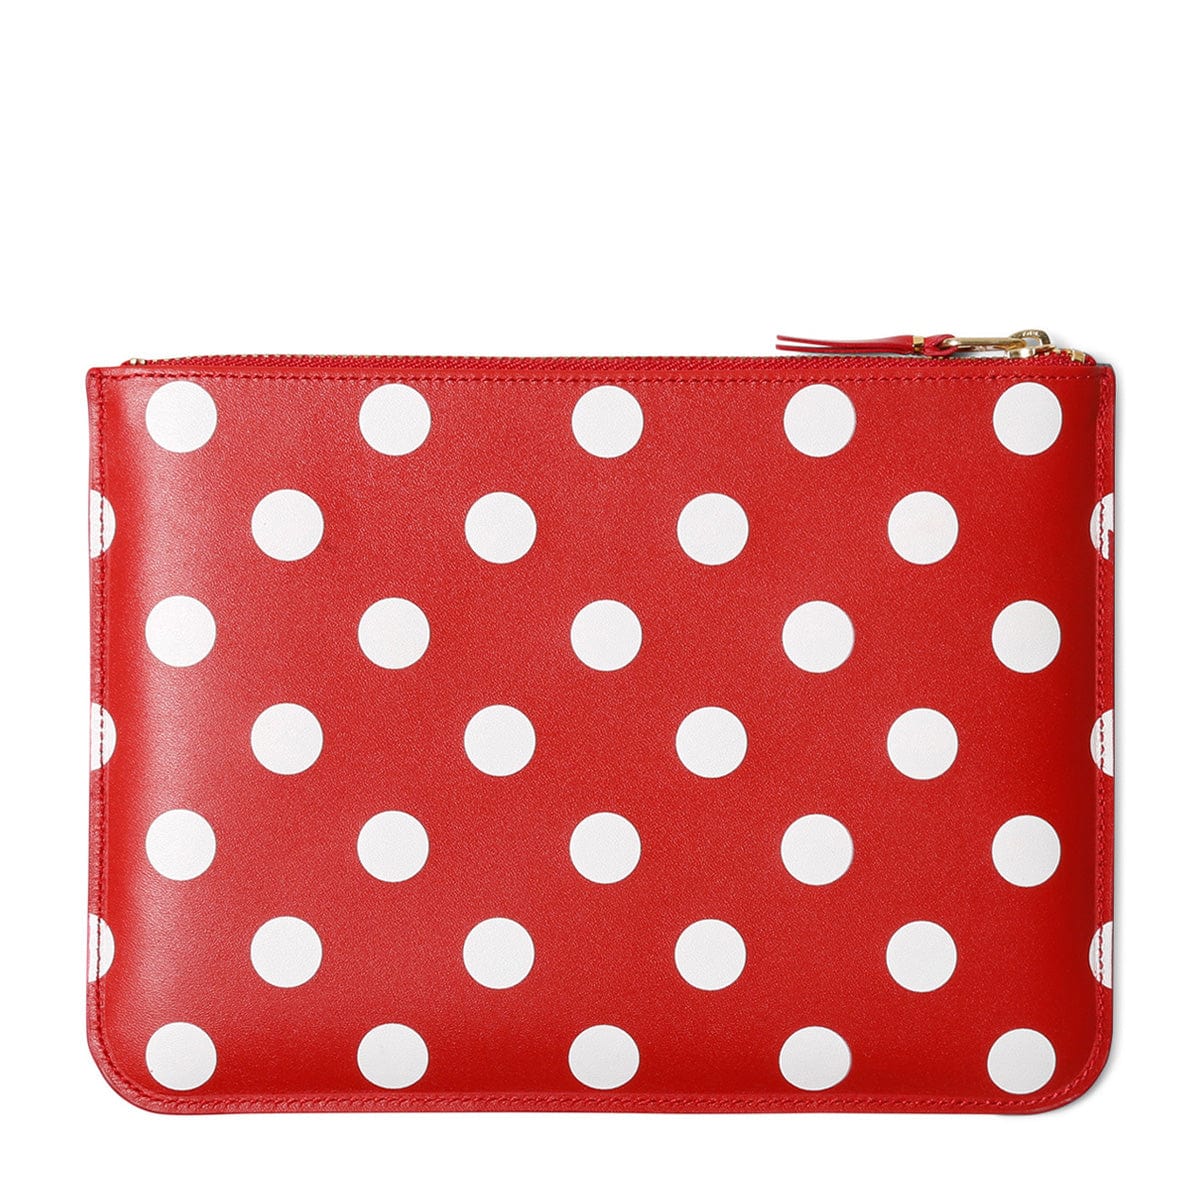 Comme Des Garçons Wallet Wallets & Cases RED / O/S DOTS PRINTED LEATHER LINE